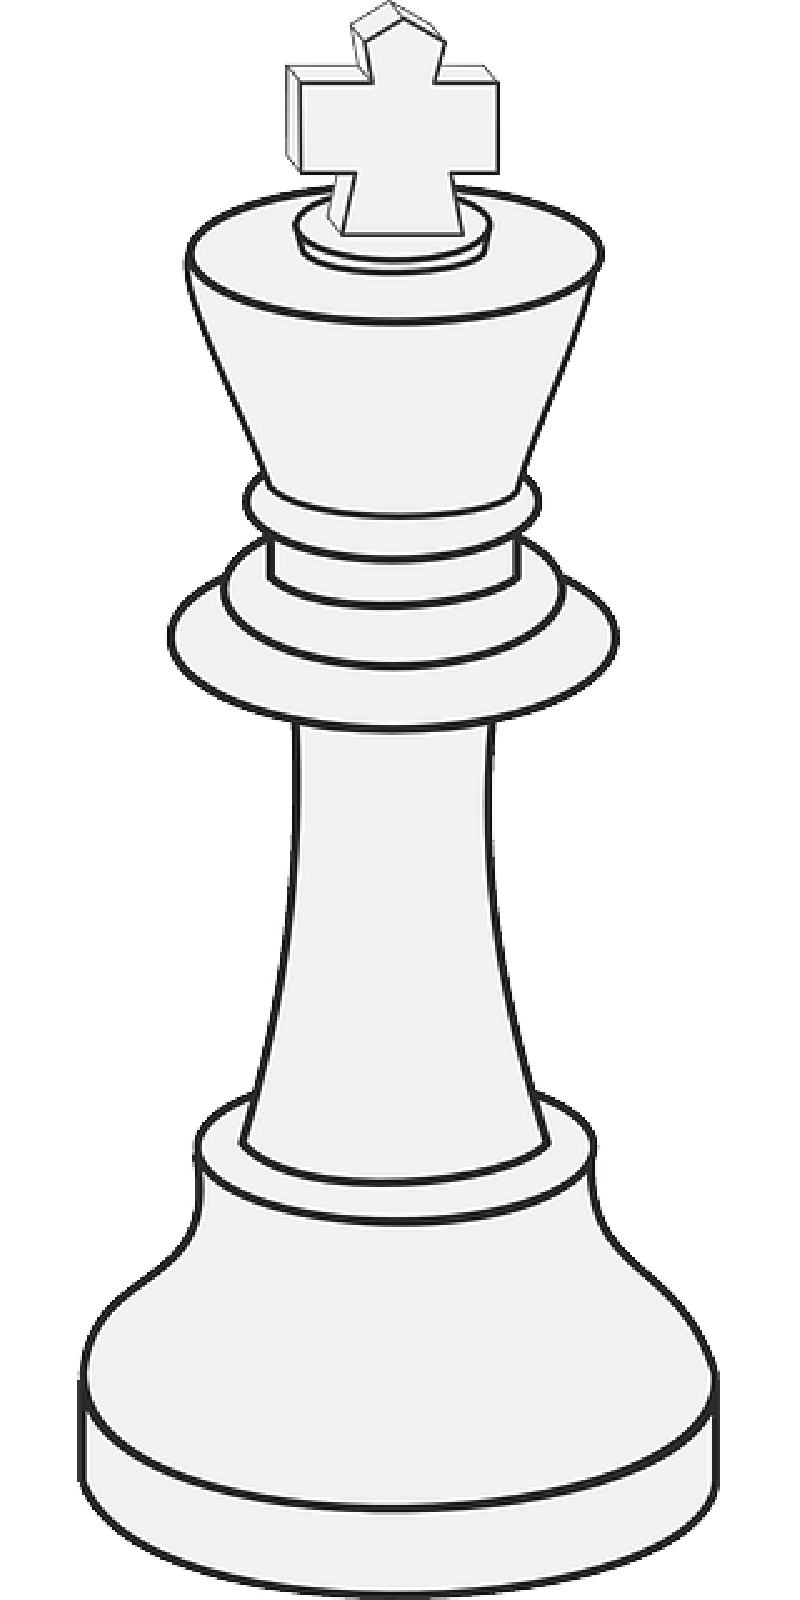 OUTLINE, DRAWING, KING, QUEEN, WHITE, CARTOON, CHESS - Public ...